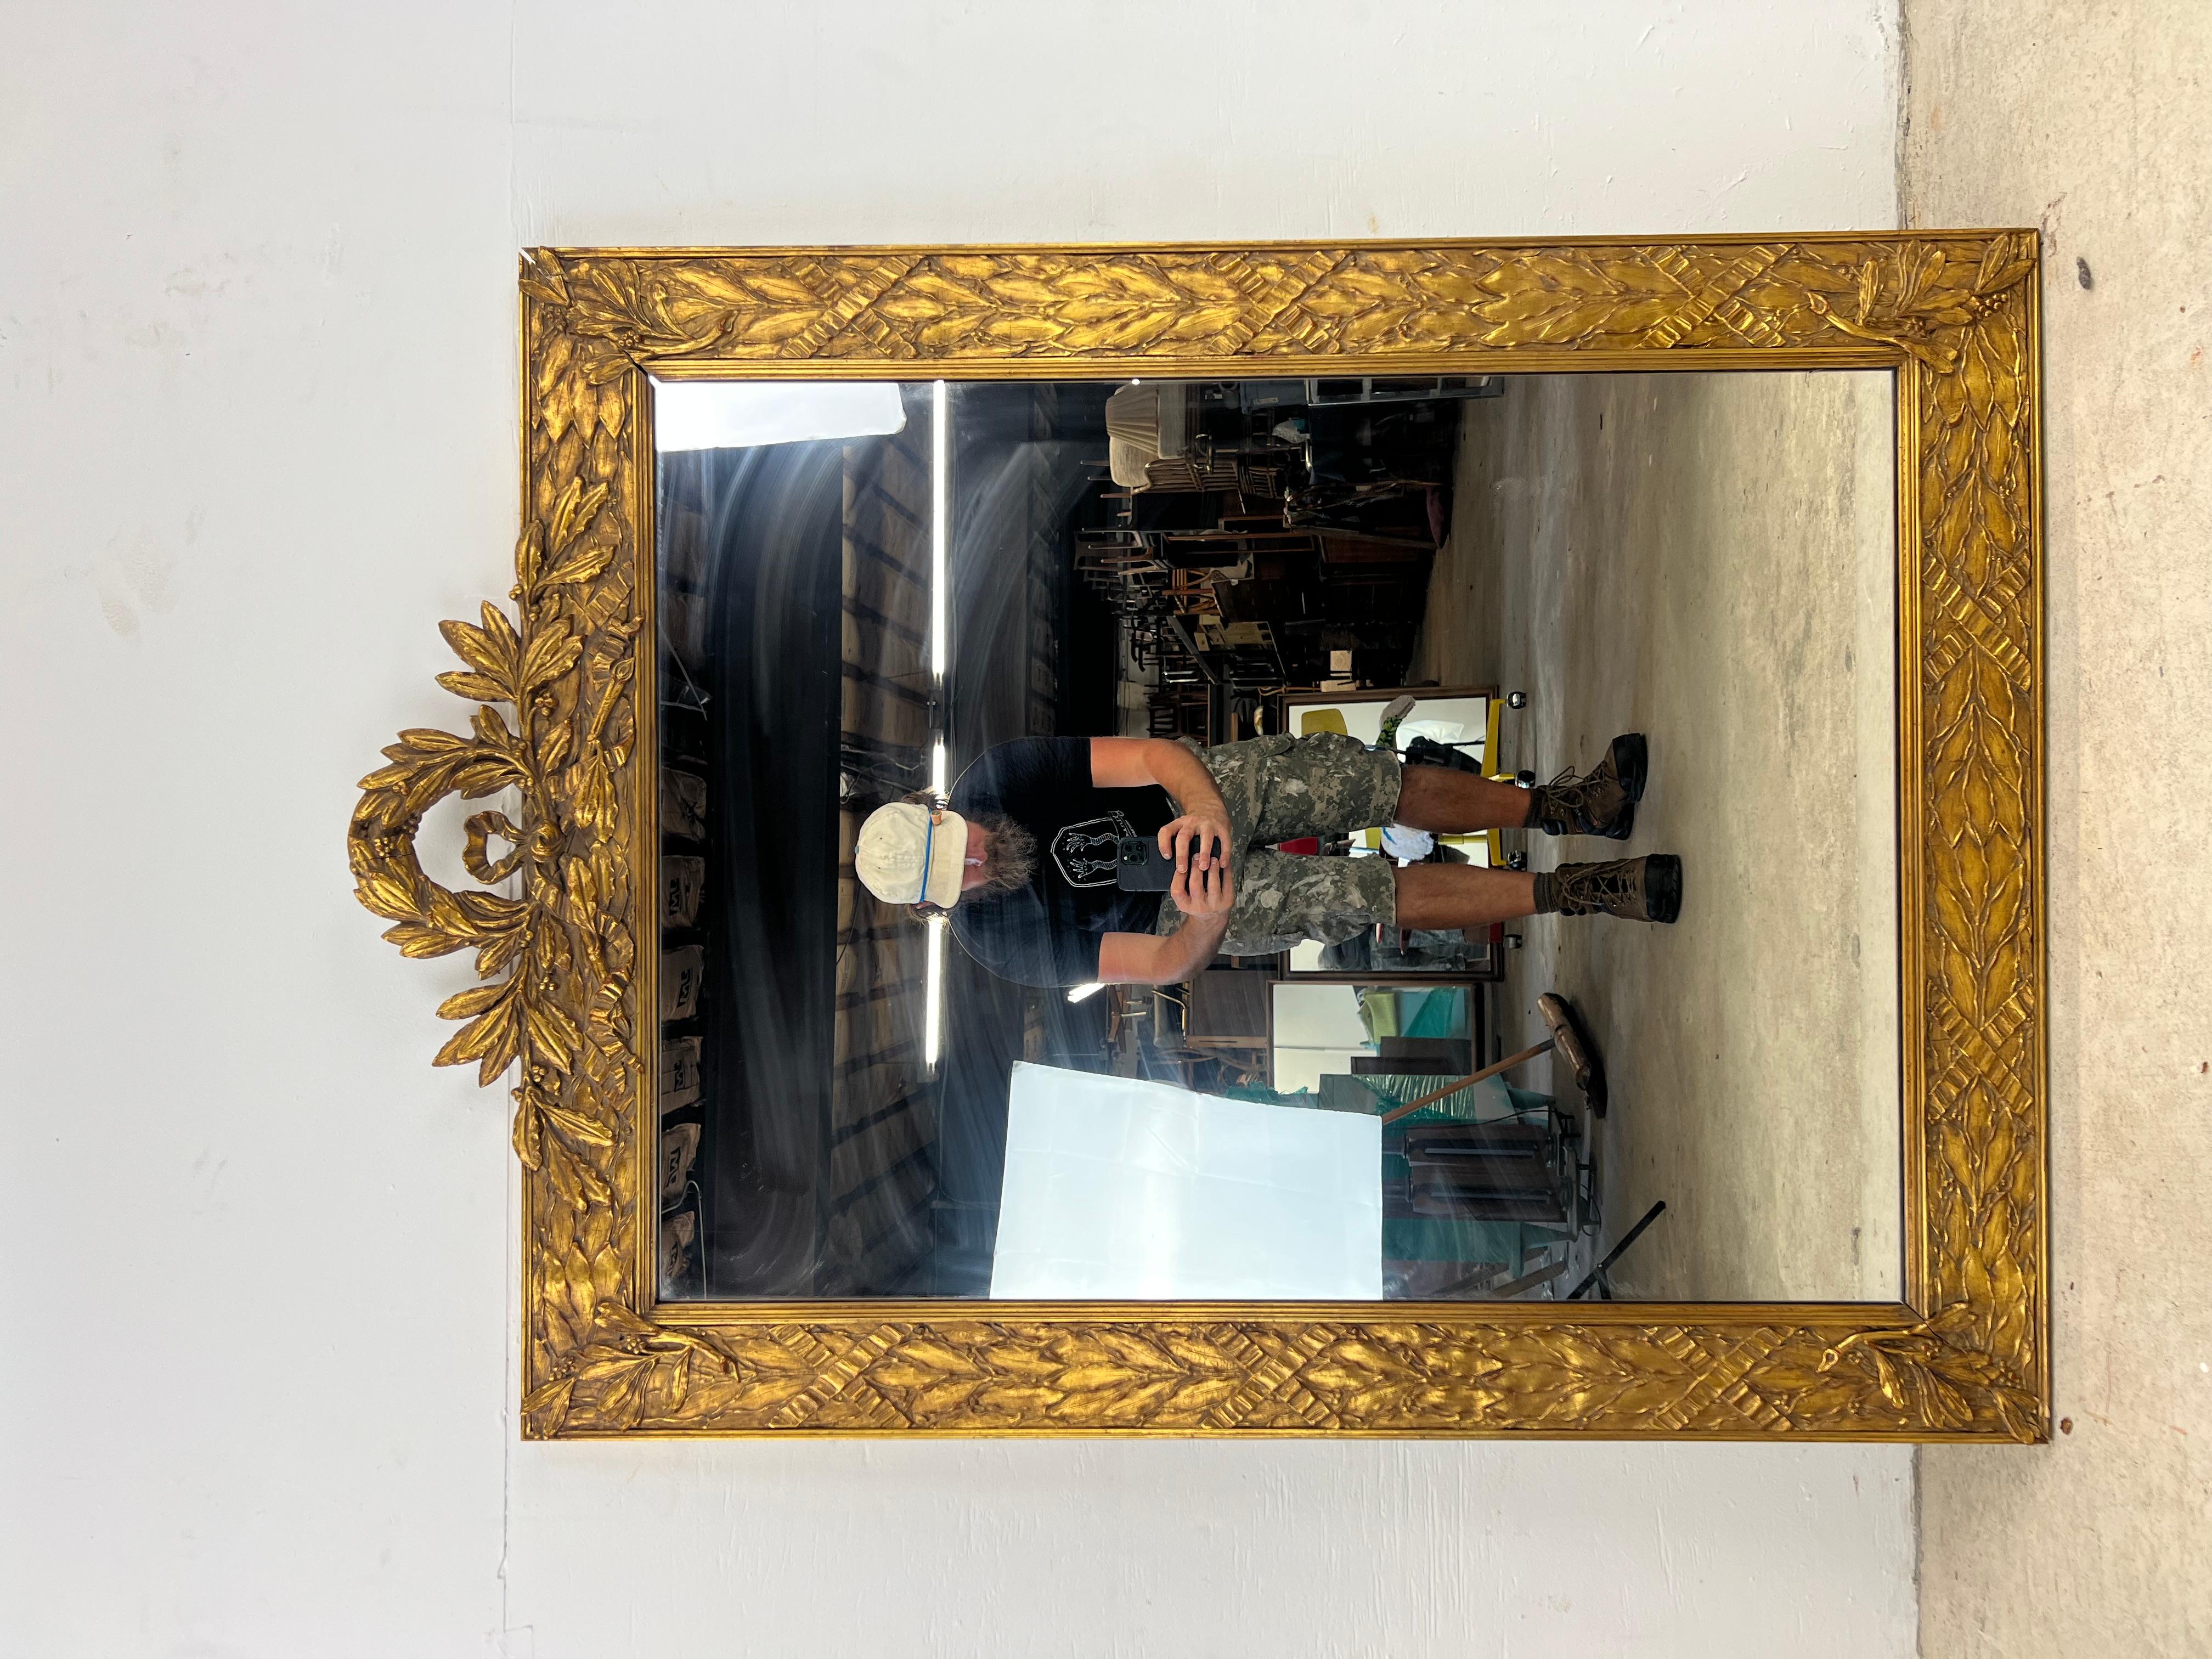 This mid century Hollywood regency style wall mirror features ornate frame with carved wood accents and gold leaf.

 Dimensions: 38w 1d 48h

Condition: Original gold leaf finish is in OK condition.  The wood frame has some damage to the ornate